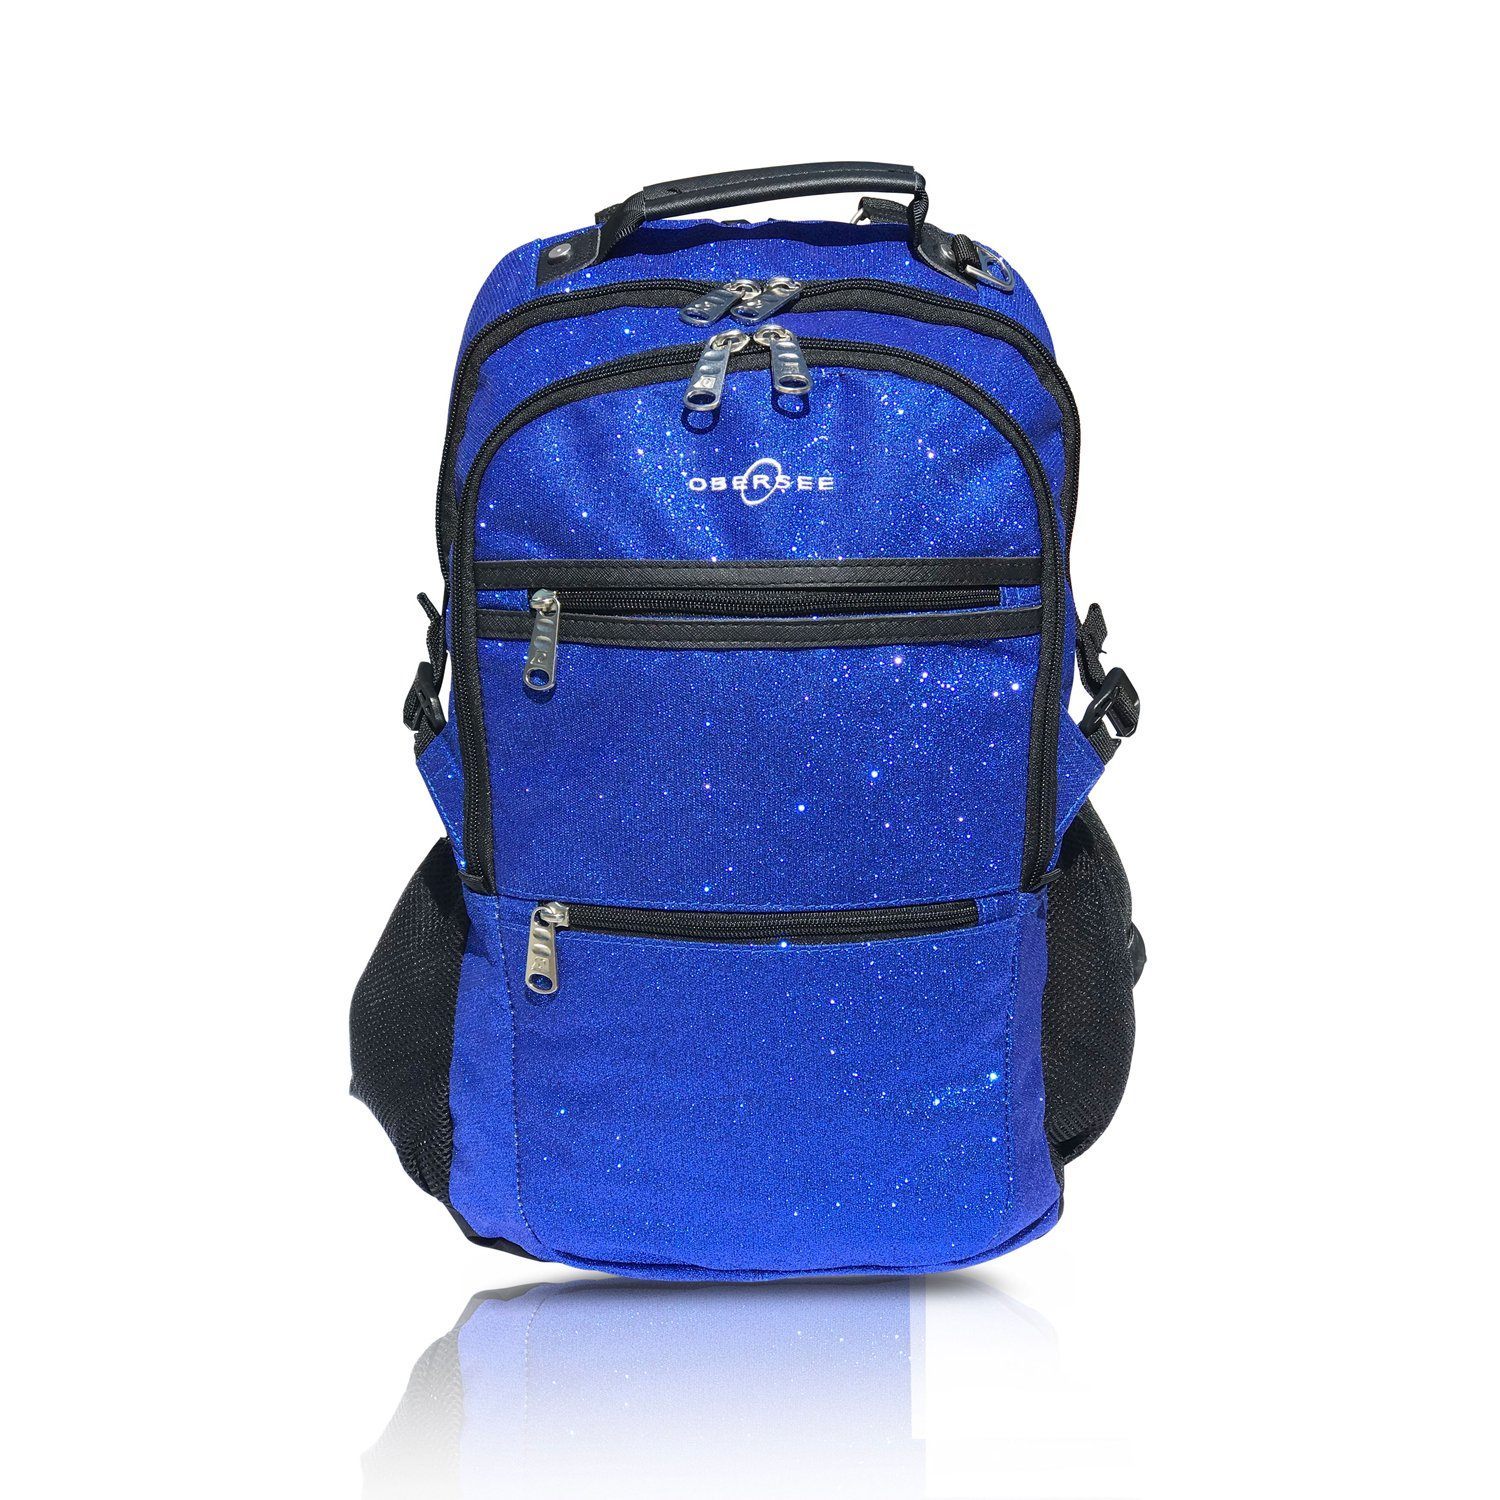 Obersee  Paris Sparkle Backpack